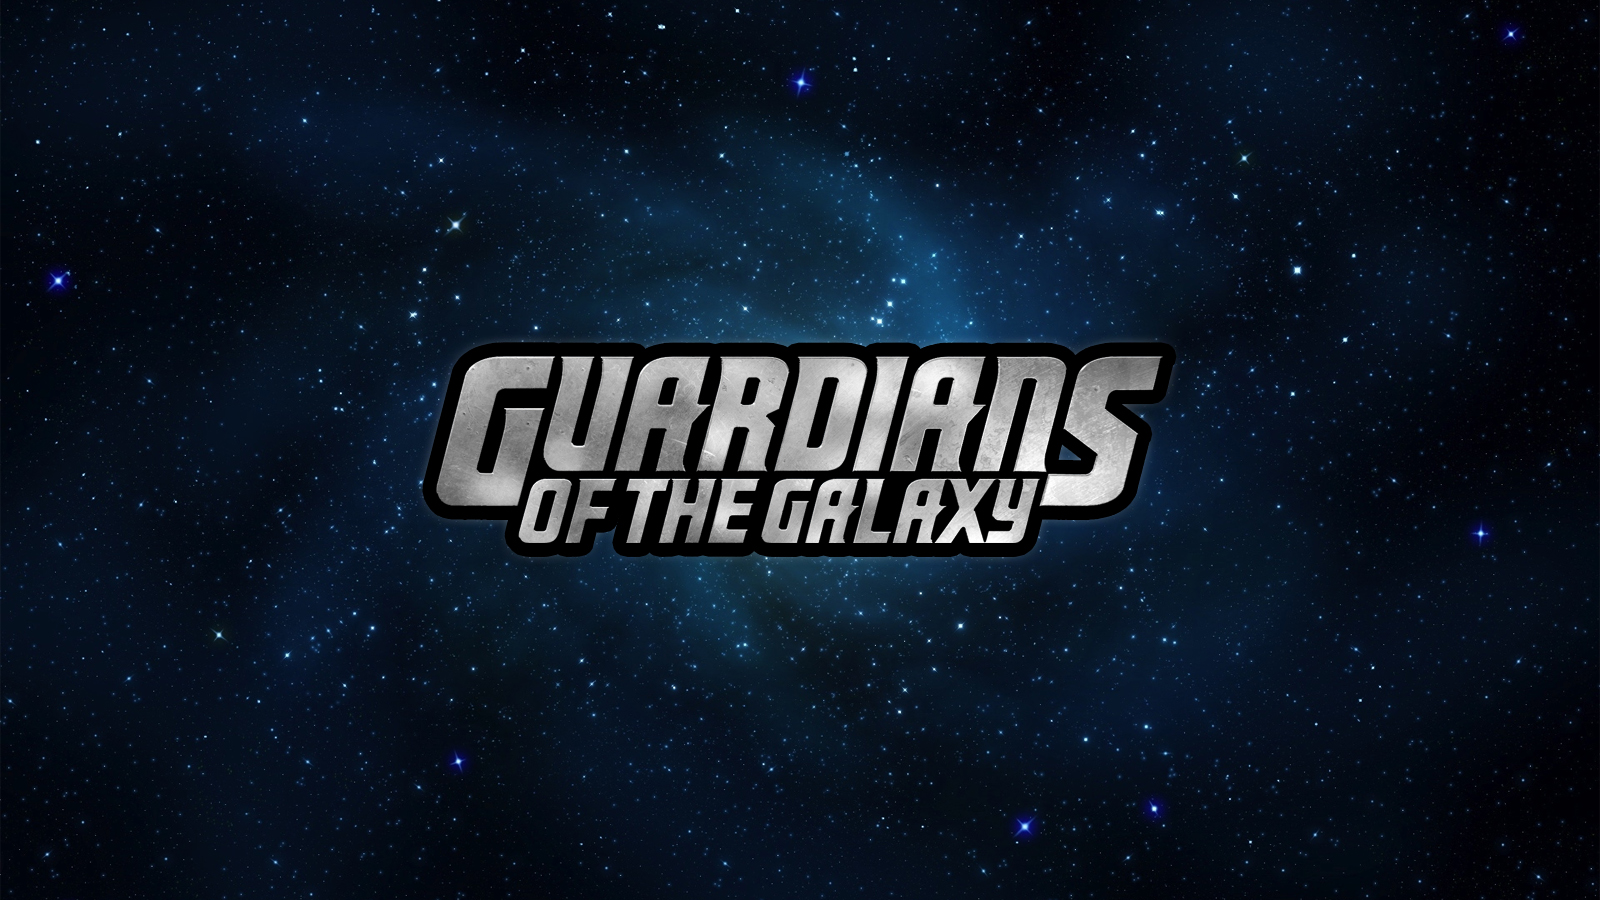 Guardians of the Galaxy | Wallpaper by Squiddytron on DeviantArt